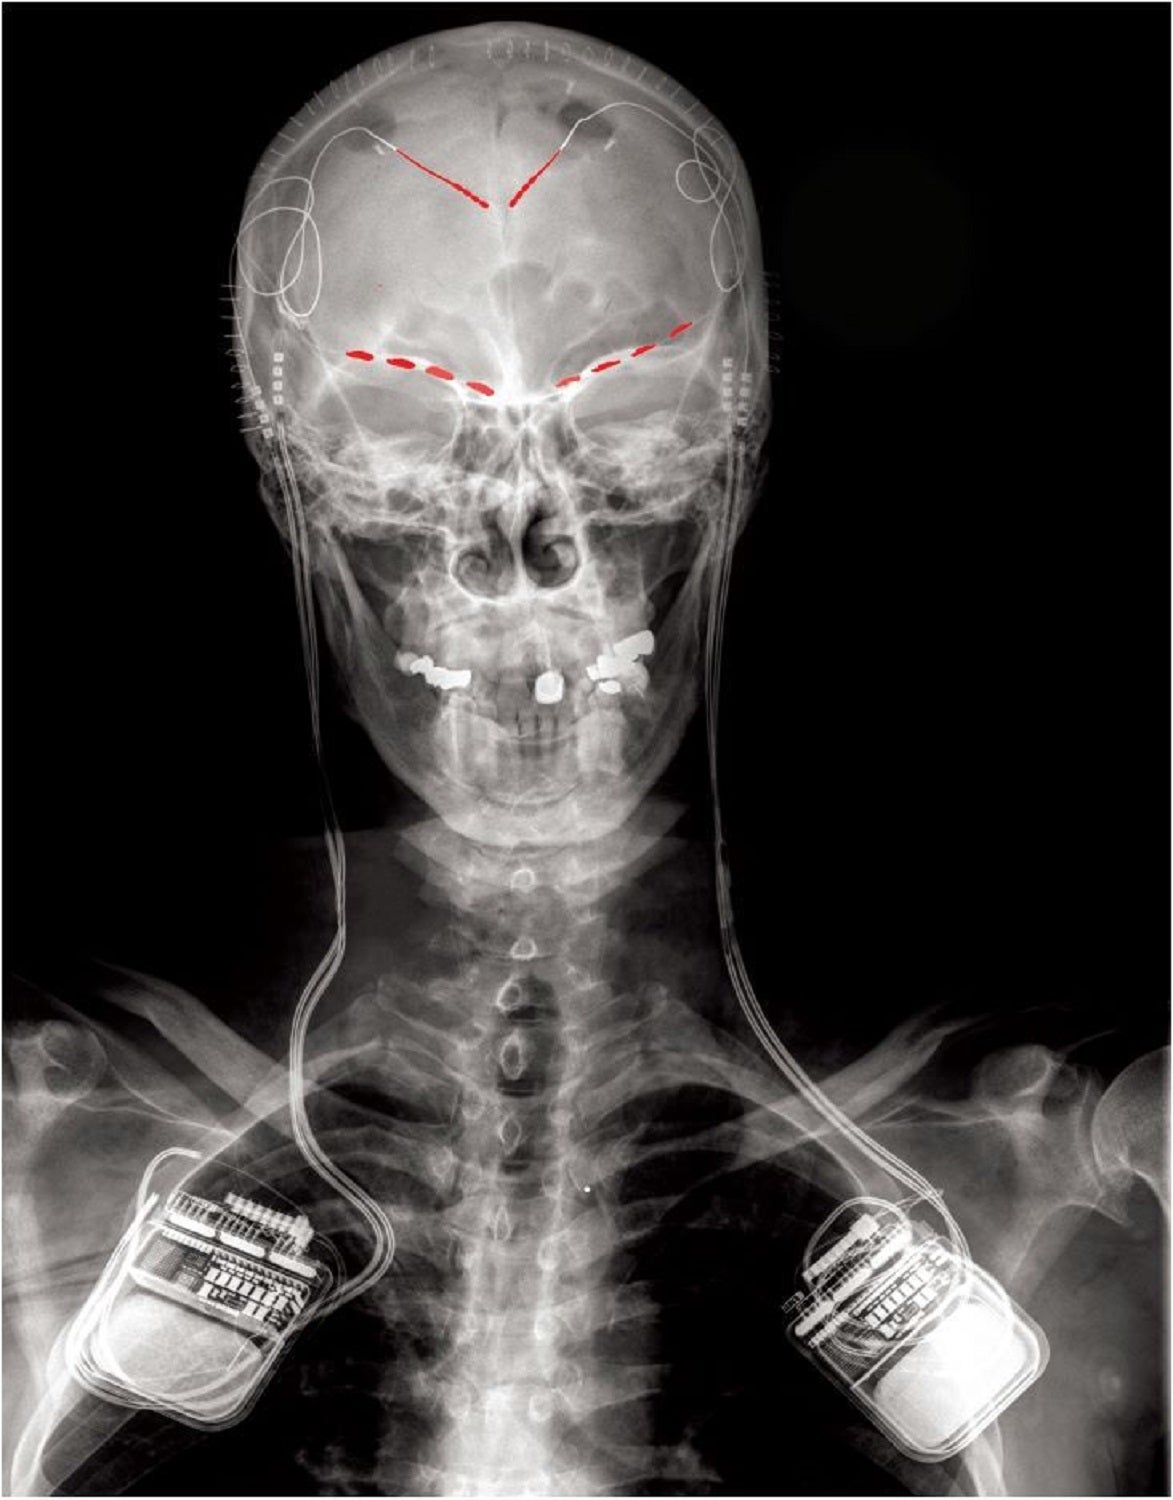 X-ray of chronic pain patient with activity tracking electrodes